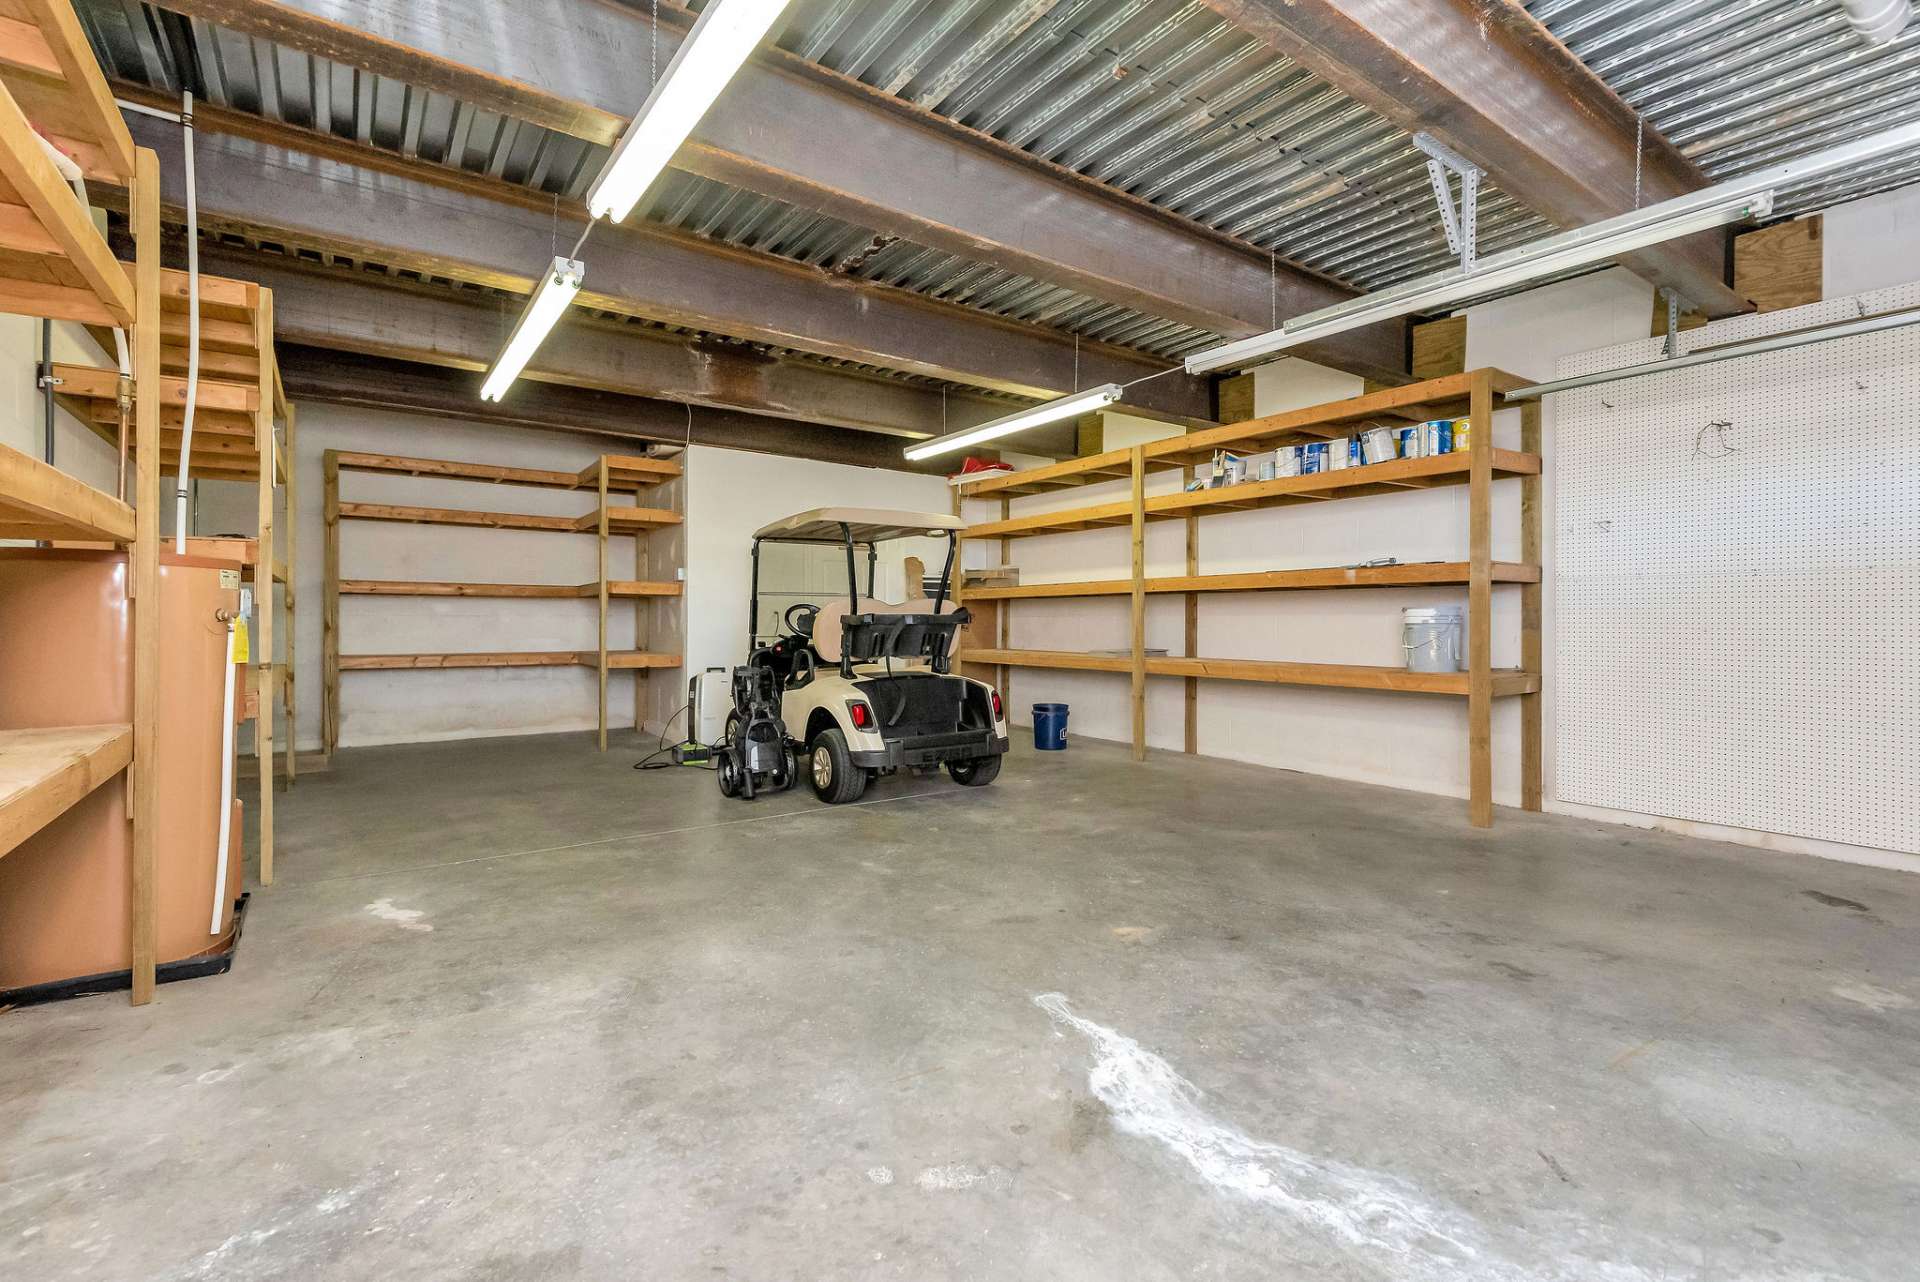 The lower level also provides this spacious storage area, including a cedar-lined closet, and a garage door specifically designed for a golf cart. This convenient feature provides secure storage and easy access for your outdoor equipment and toys, as well as your golf cart, protecting it from the elements and ensuring that it's always ready for your next round on the course.